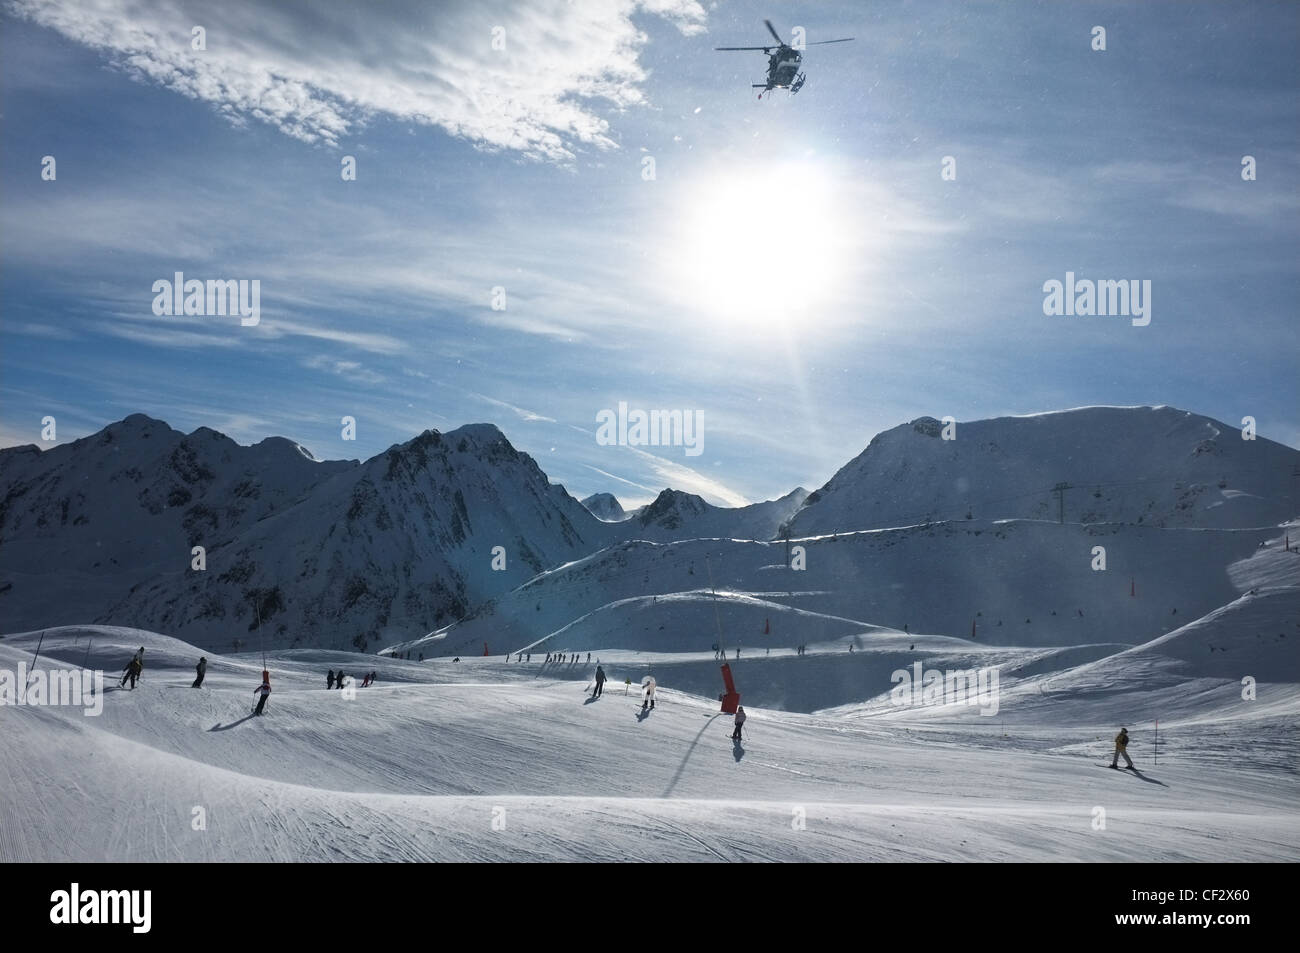 A helicopter takes off over skiers at Peyragudes ski resort, Midi-Pyrenees, France. Stock Photo